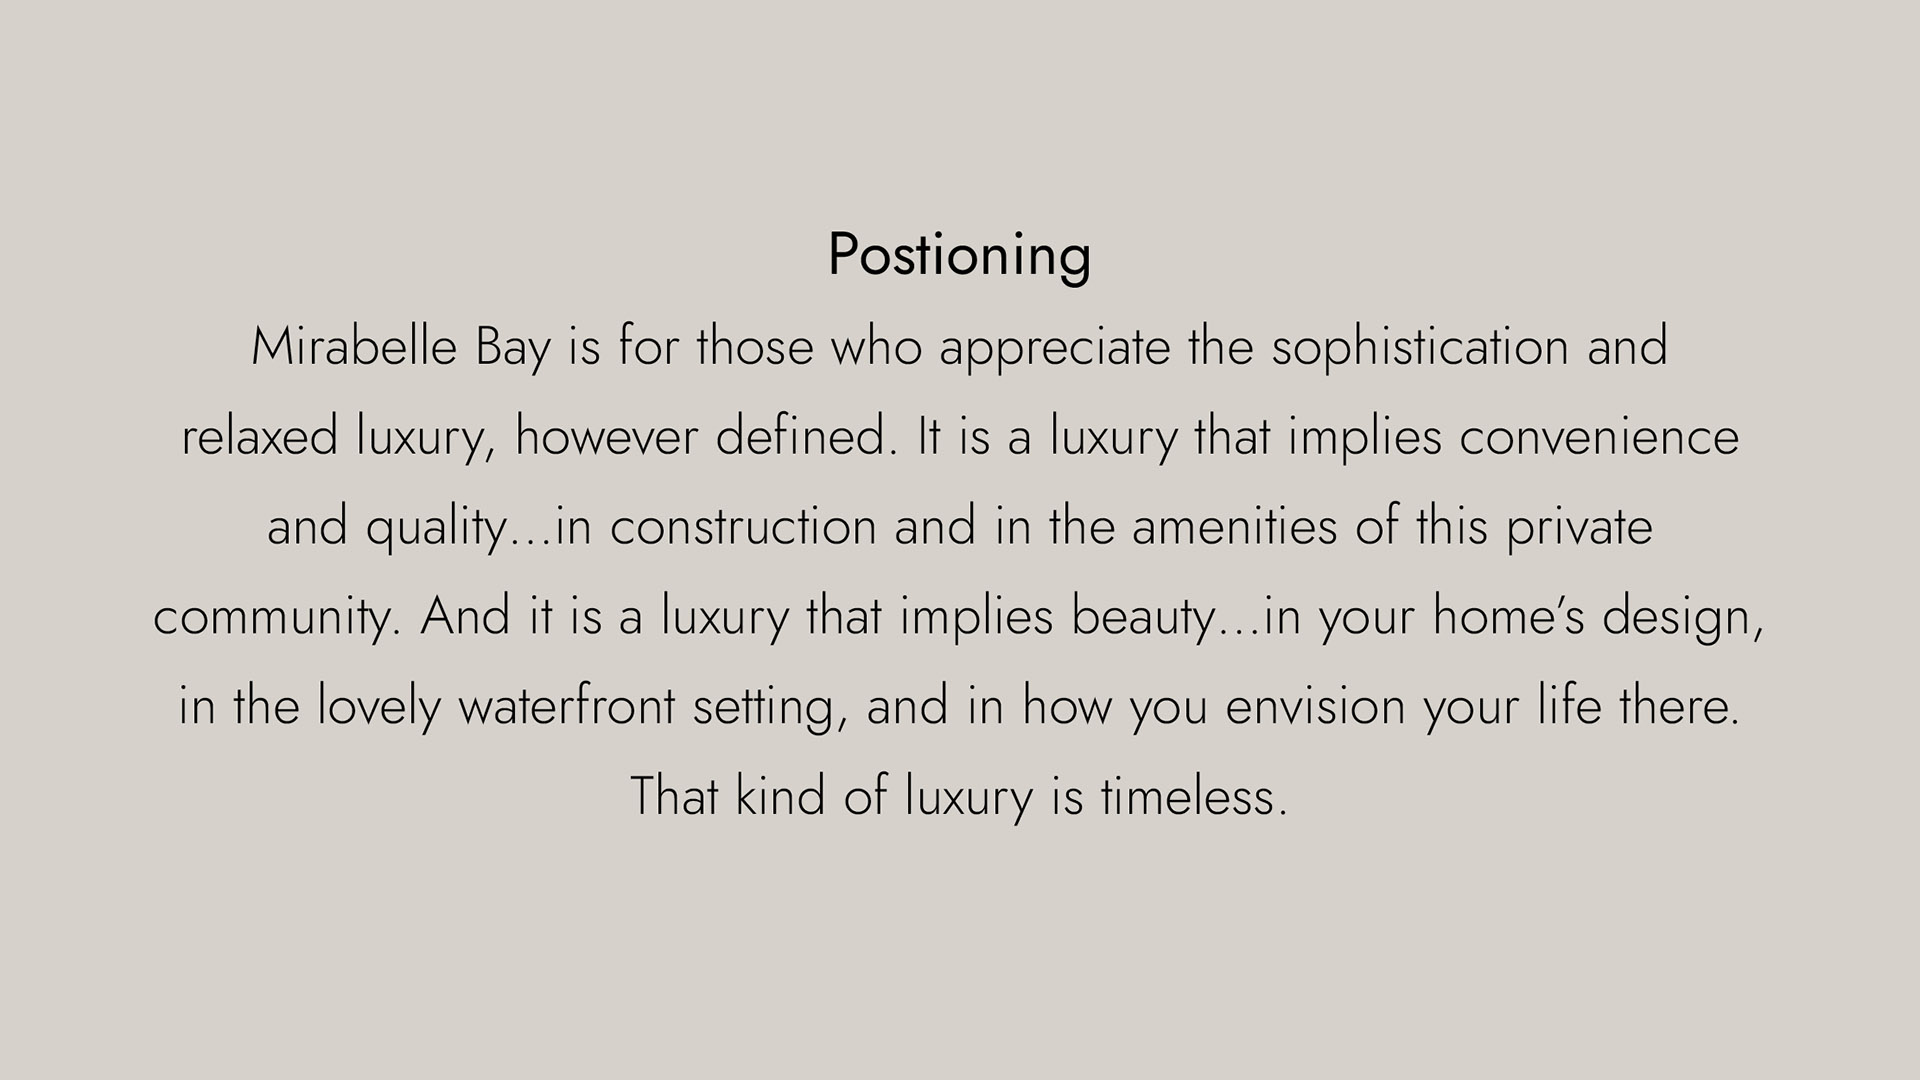 mirabelle bay positioning statement use this